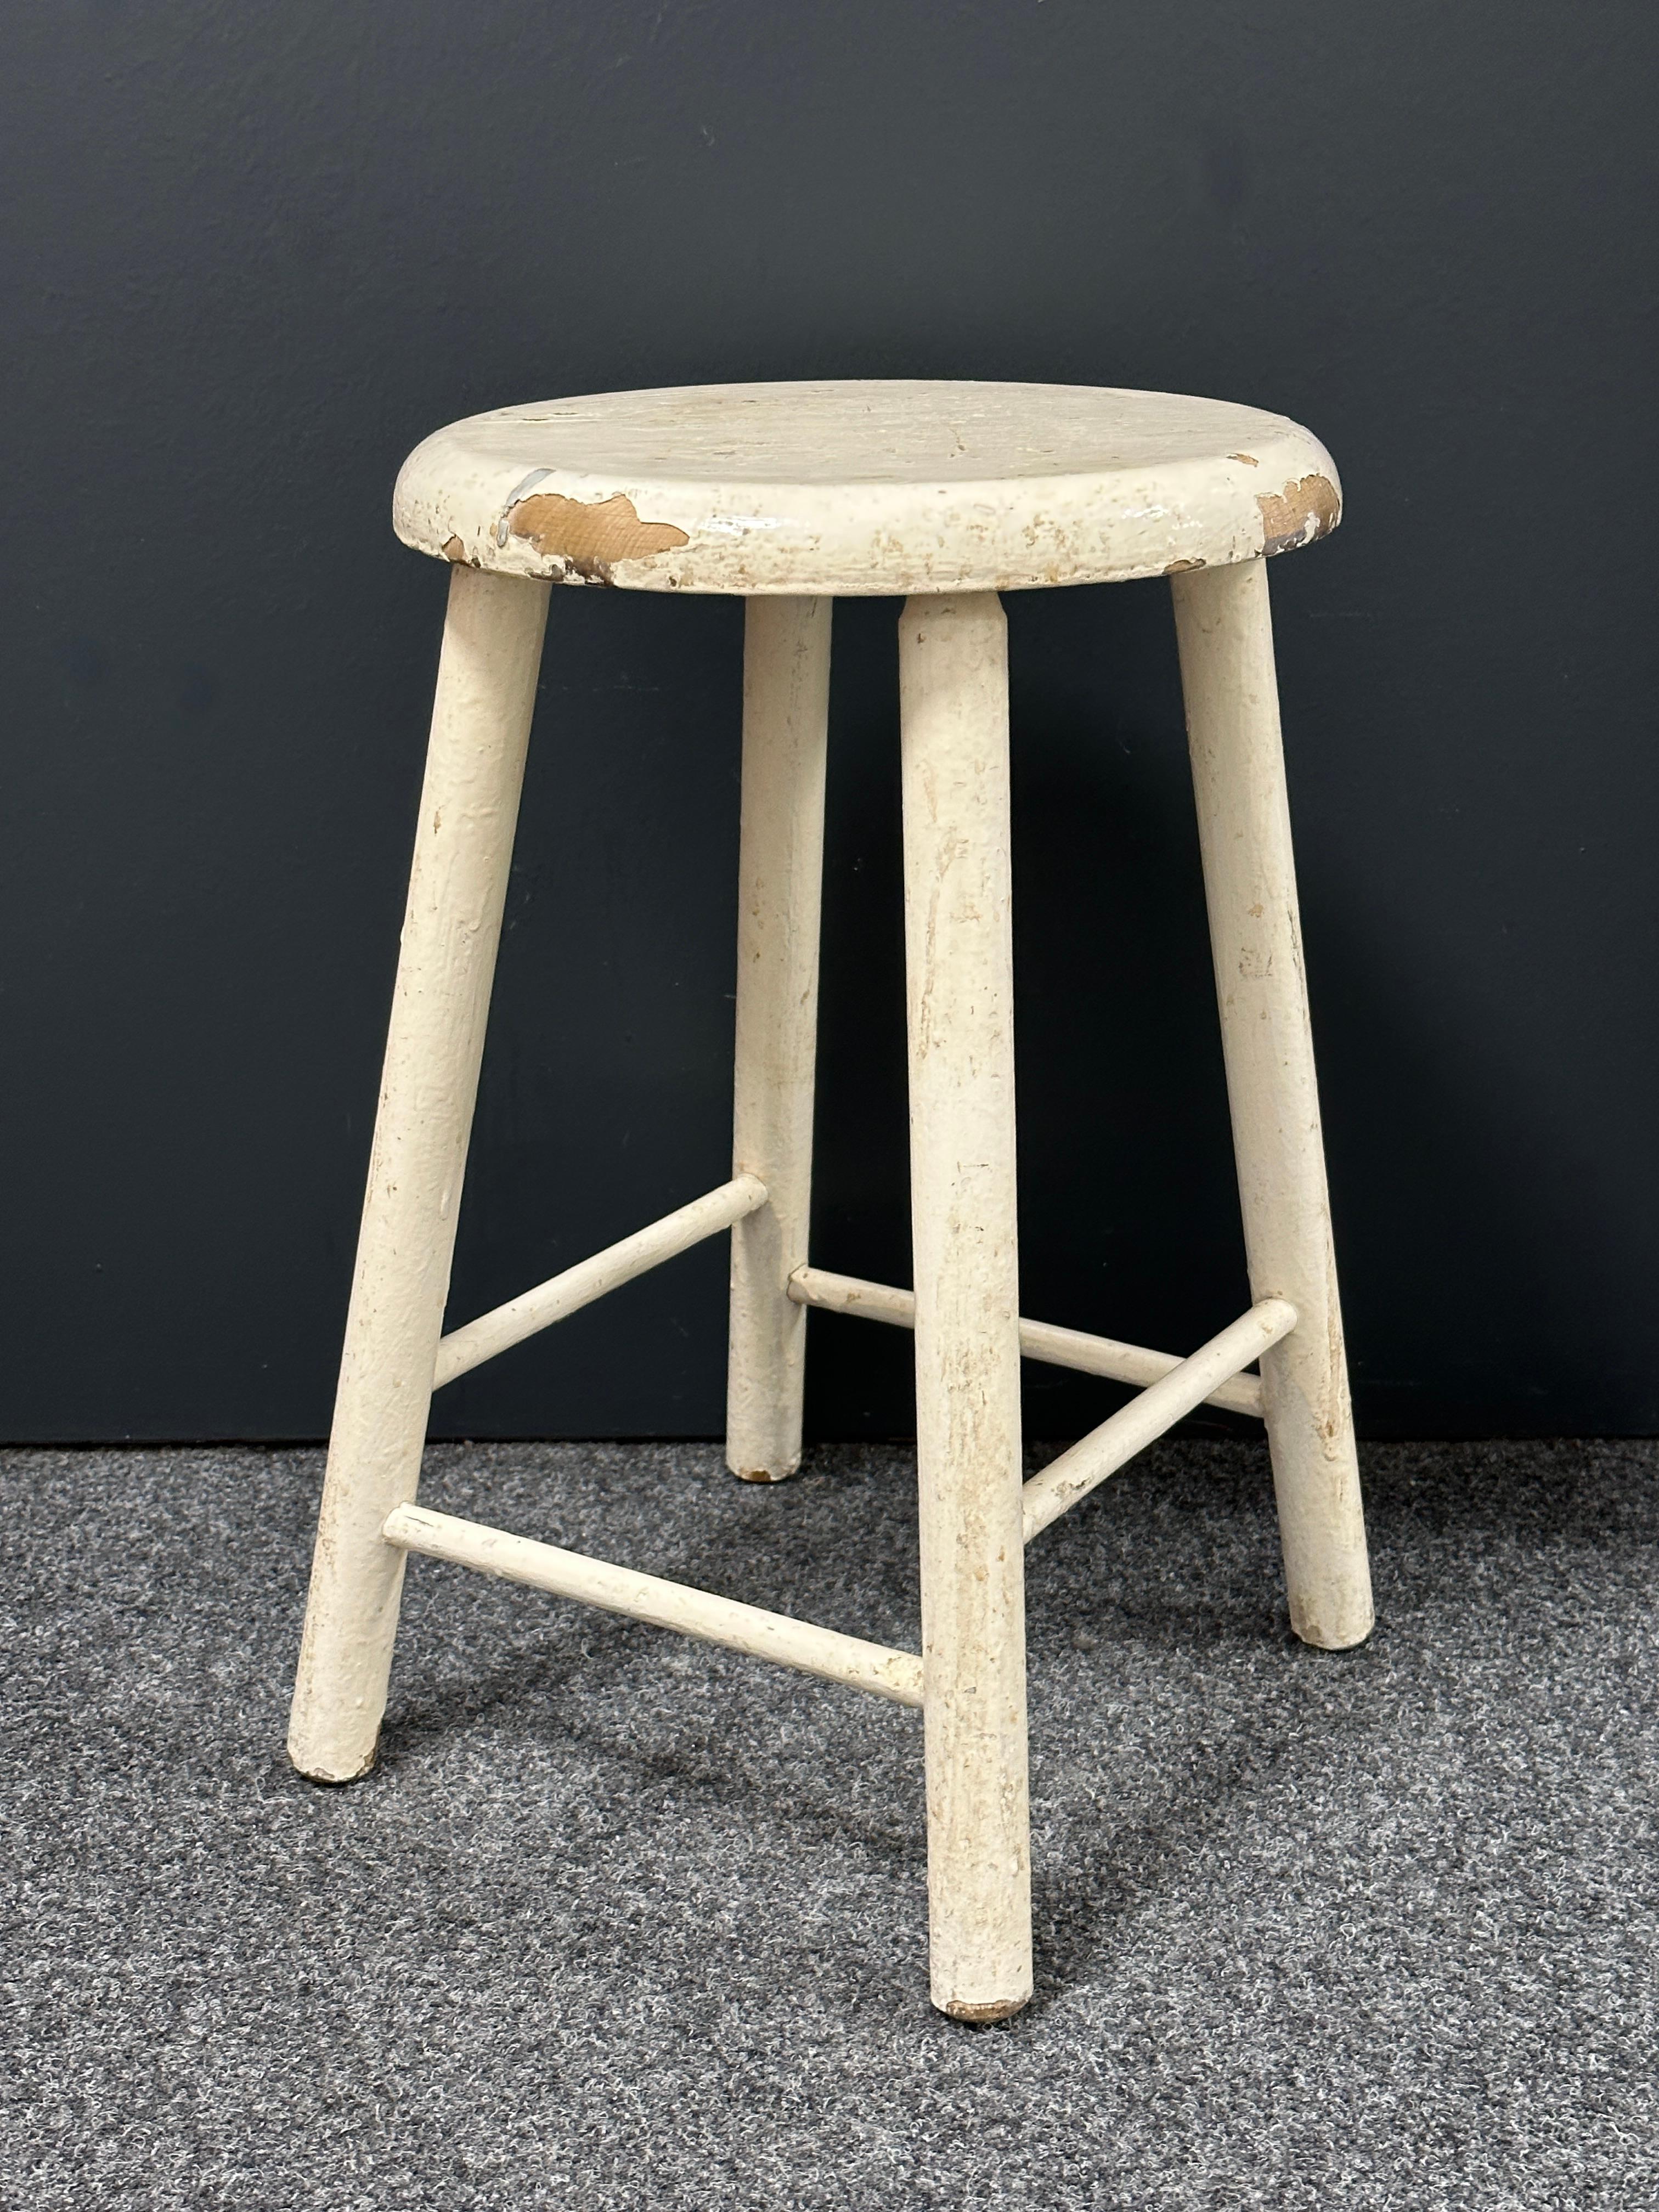 This 20th century wabi sabi 4 leg workshop stool from Germany is an excellent example of this style. The piece has a round, rustic-looking seat made of wooden planks and is supported by four spindle legs. The stool has a simple, understated design